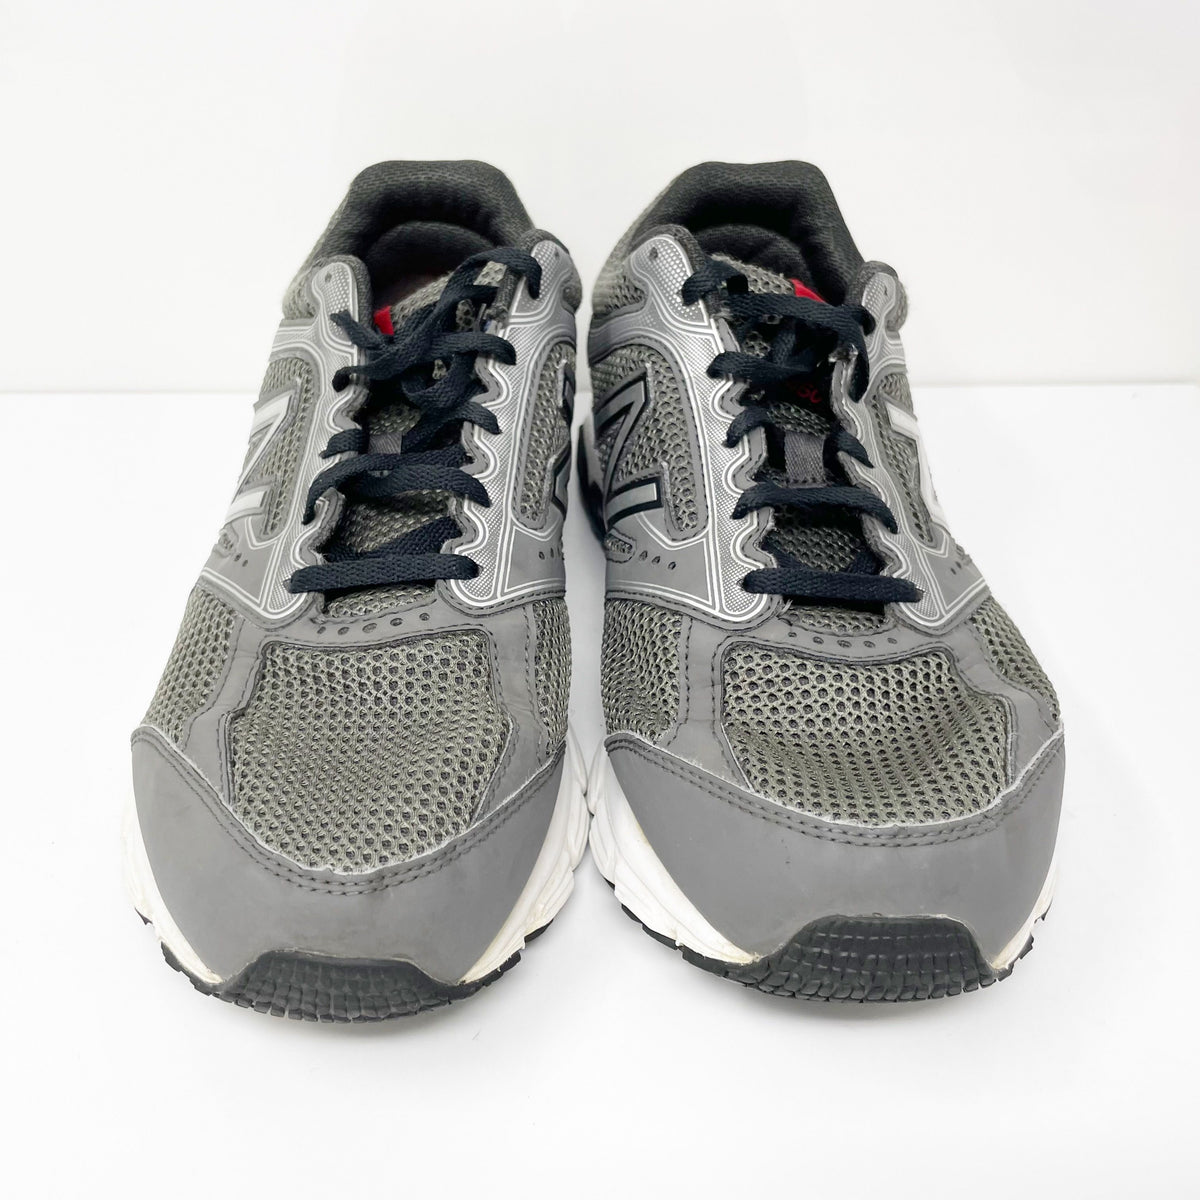 New Balance Mens 460 V2 M460LG2 Gray Running Shoes Sneakers Size 10 4E ...